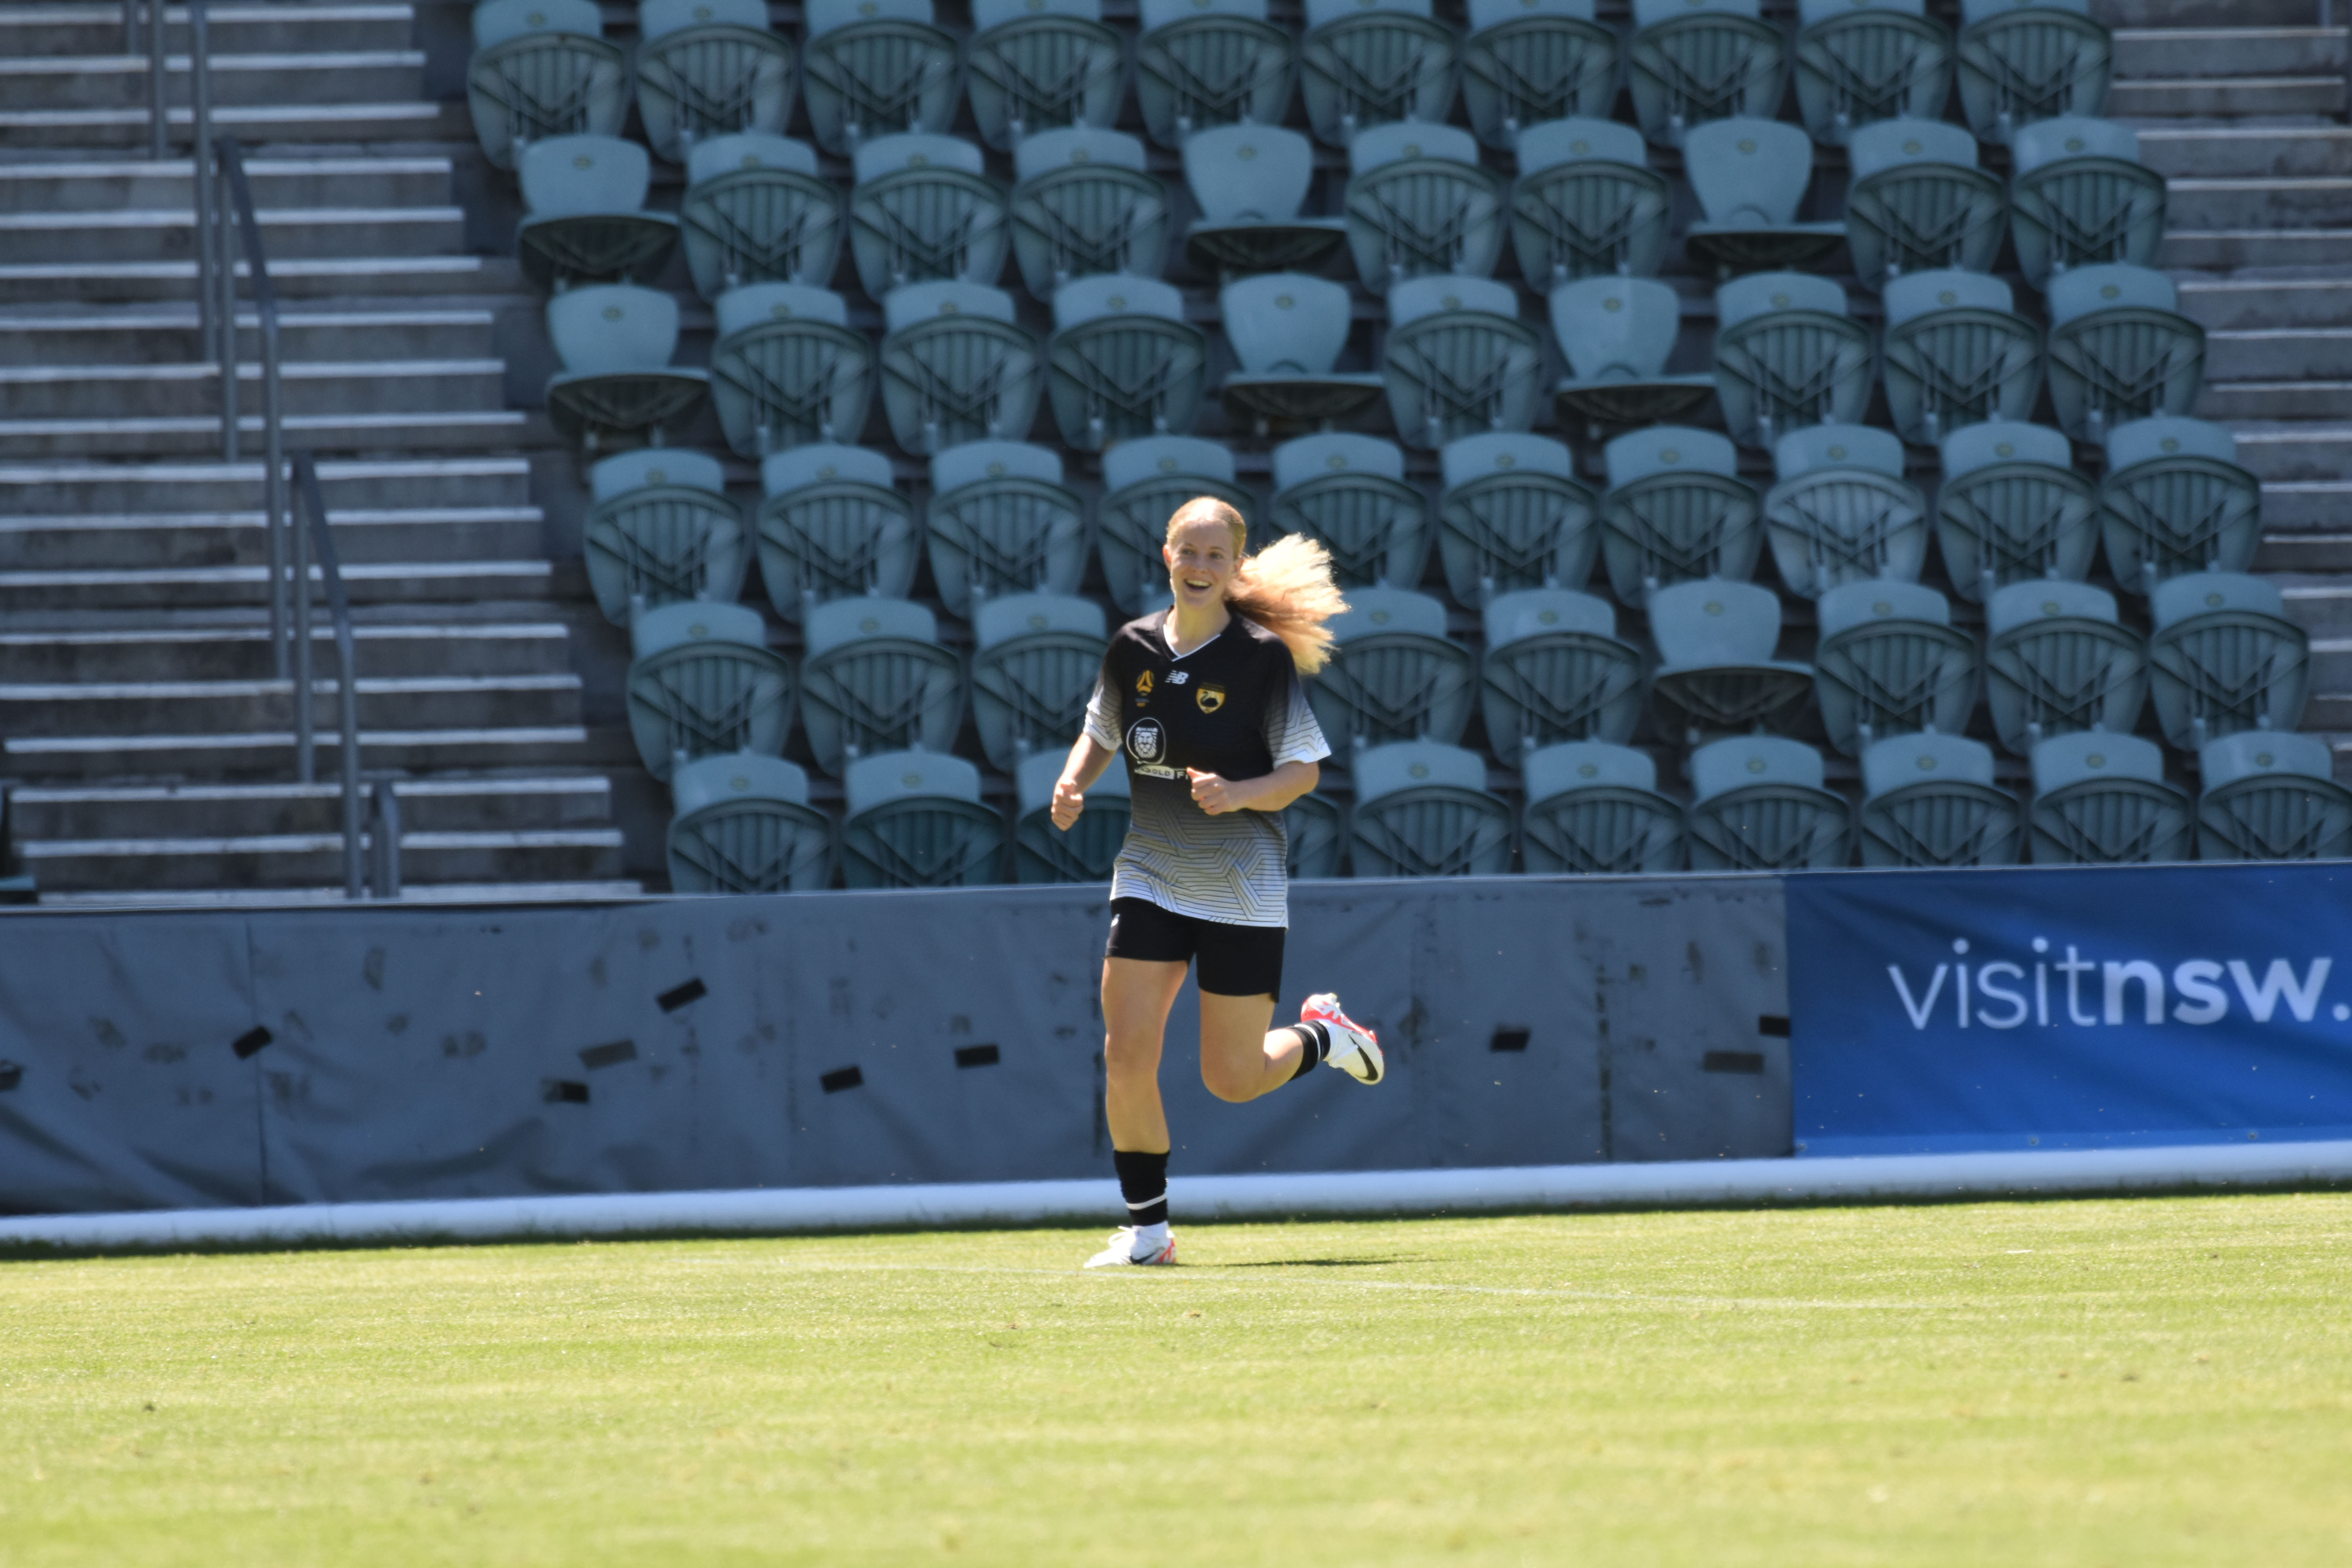 Emily Garnett celebrates scoring a goal for Western Australia against Capital Football during the National Youth Championships 2023 Girls' Tournament Day at WIN Stadium.